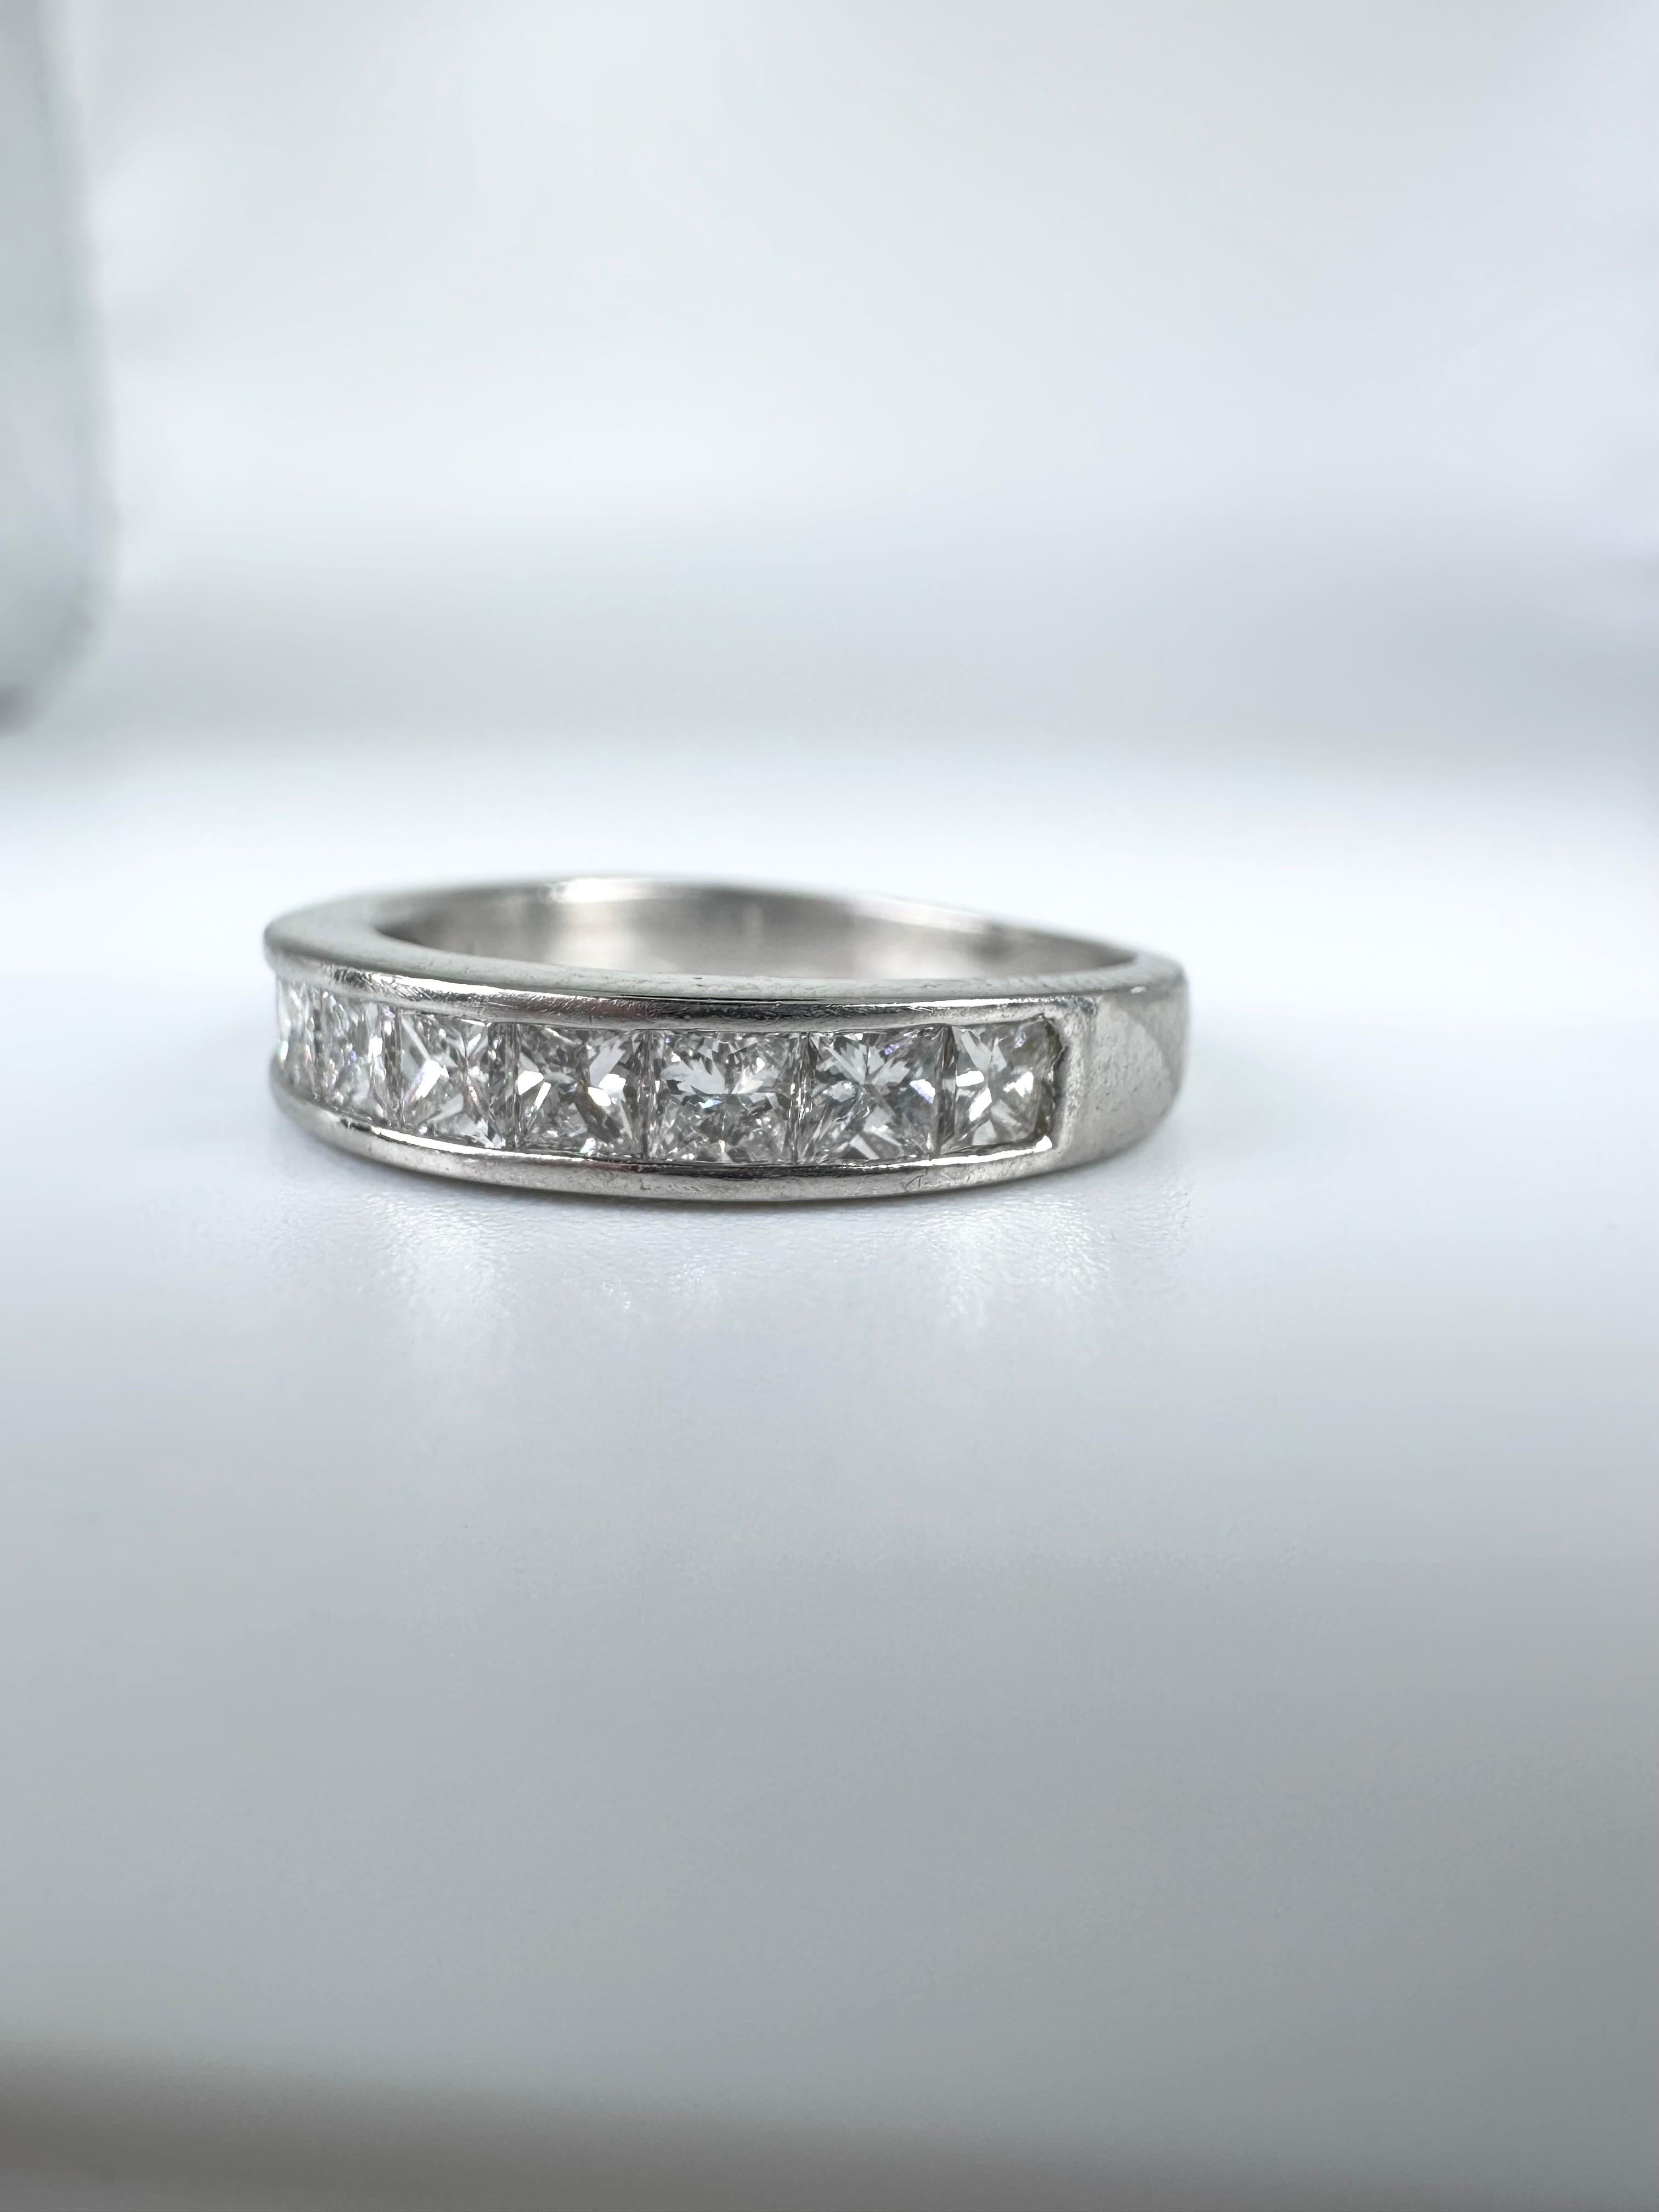 Princess Cut Wedding Band 1 Carat Platinum Diamond Ring In New Condition For Sale In Jupiter, FL